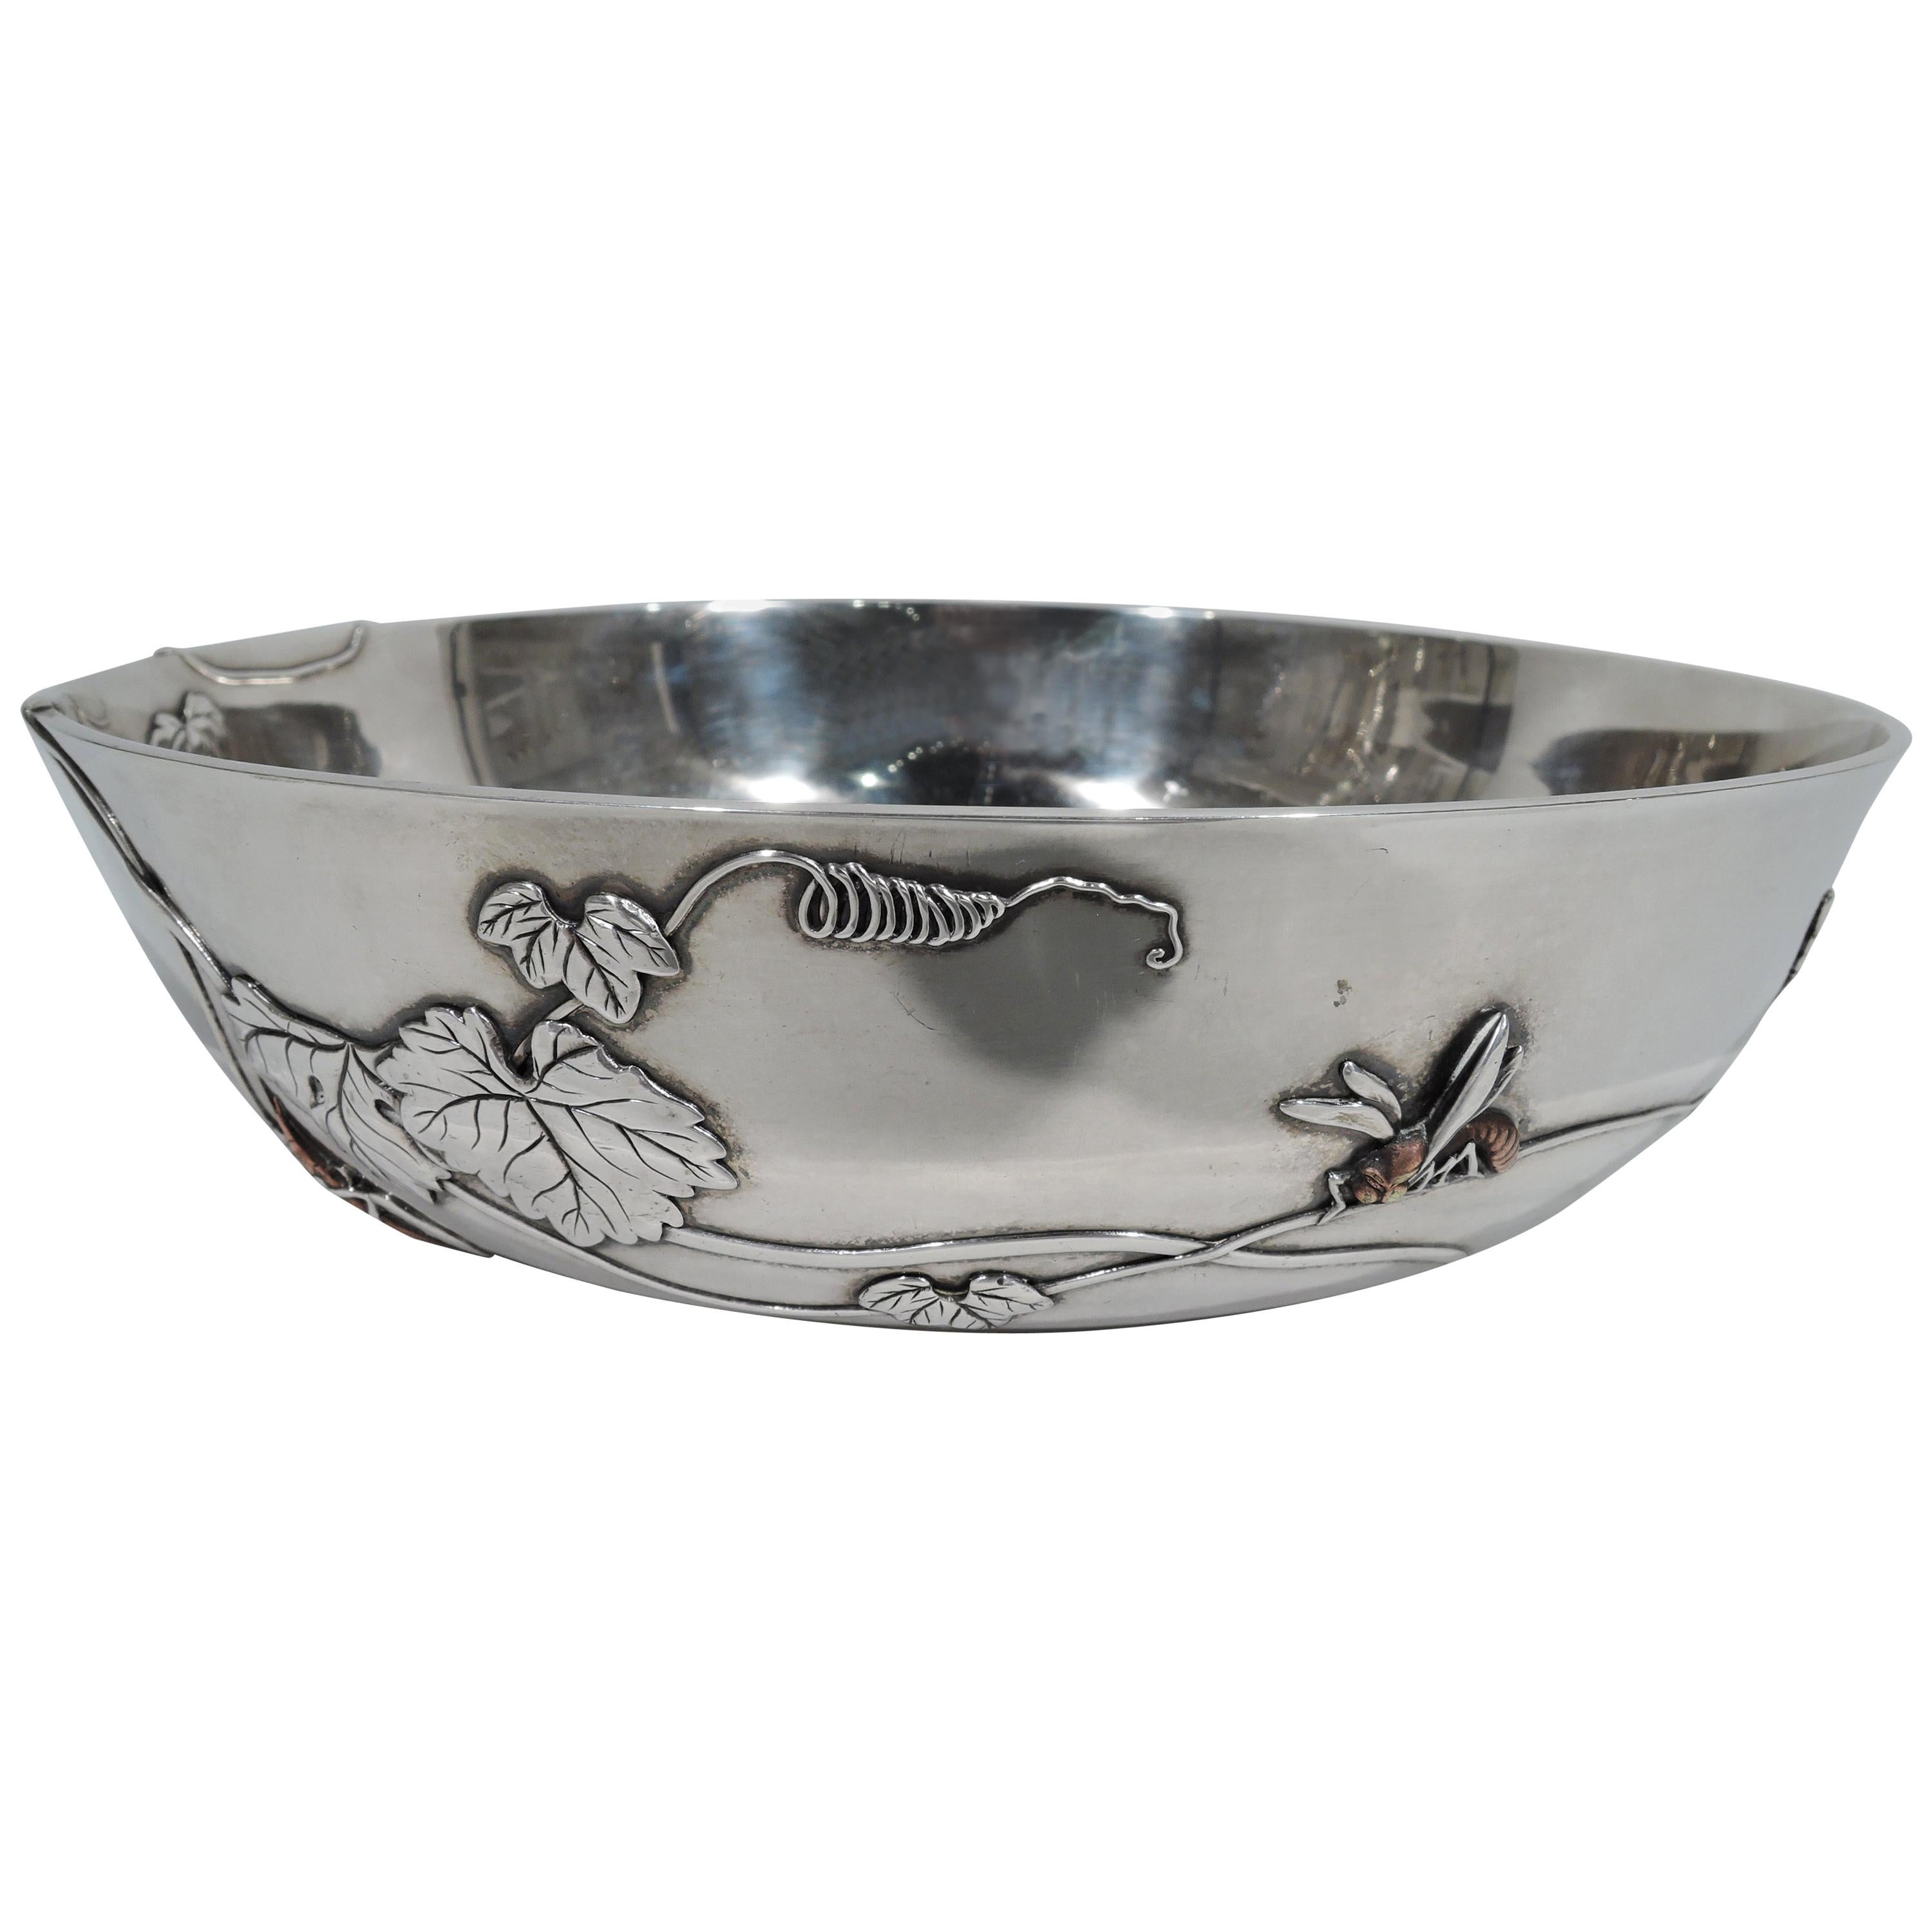 Tiffany Japonesque Mixed Metal and Sterling Silver Bowl with Dragonfly